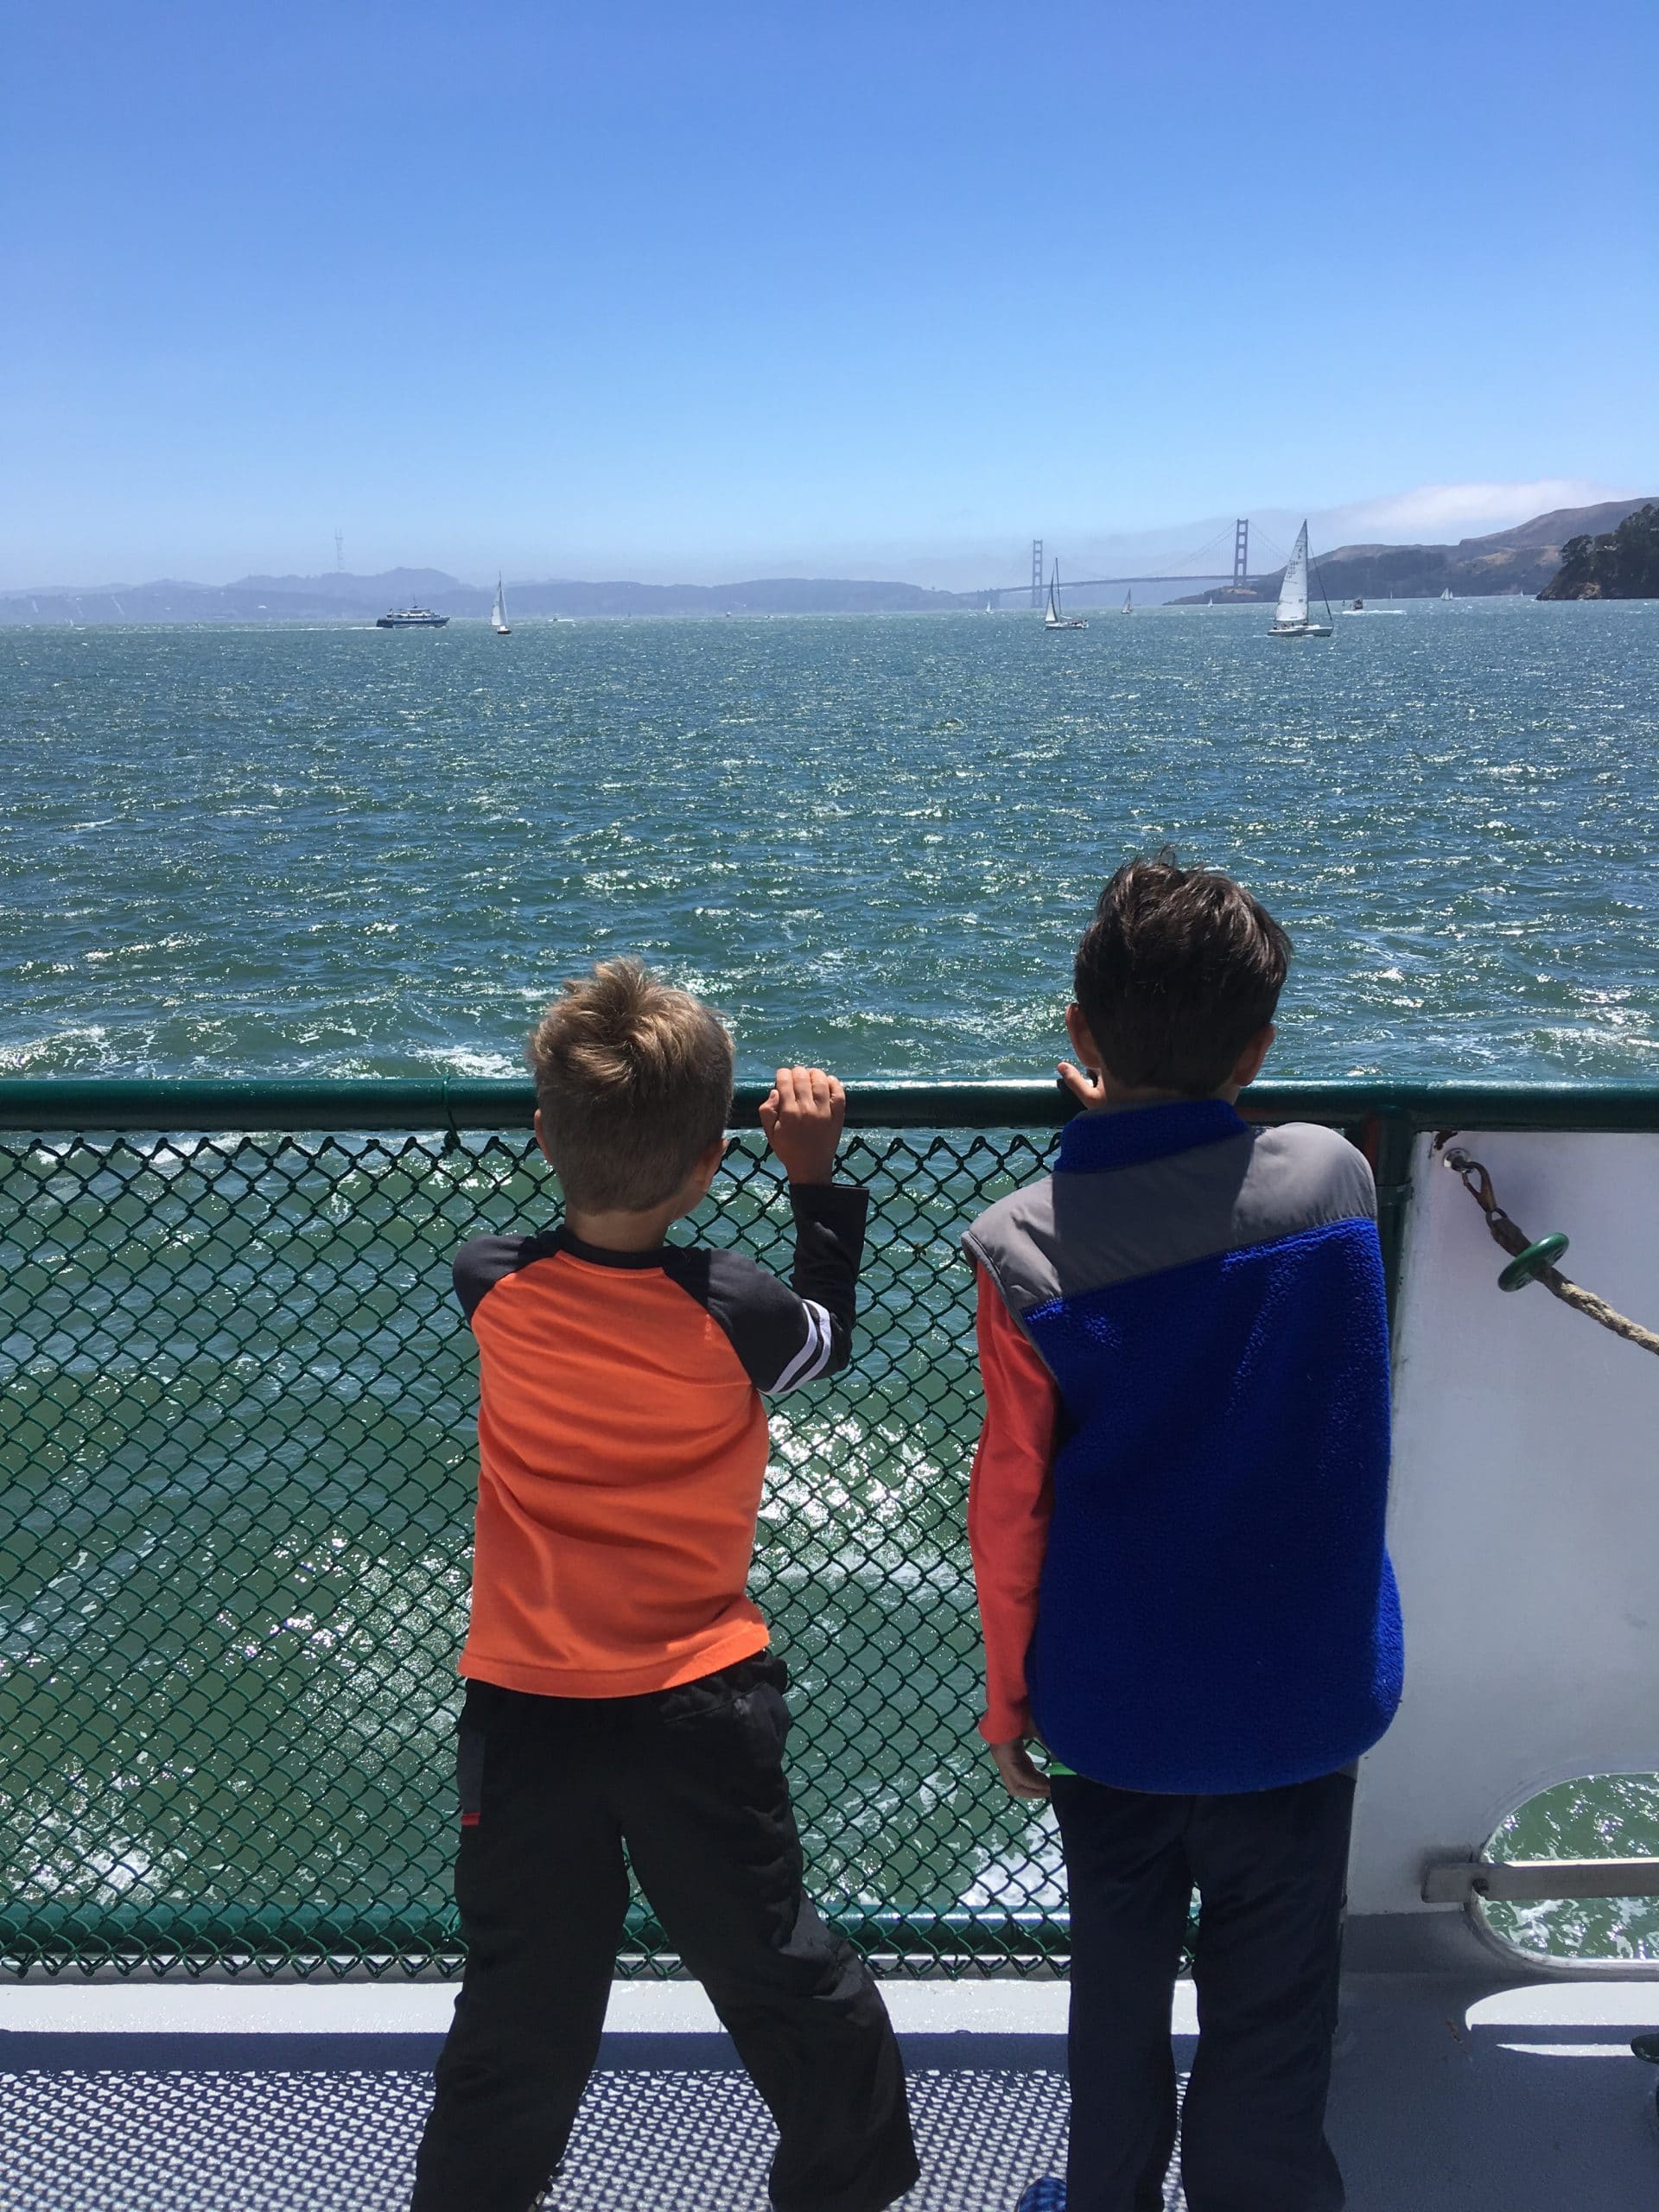 The boys enjoying the view from the ferry.